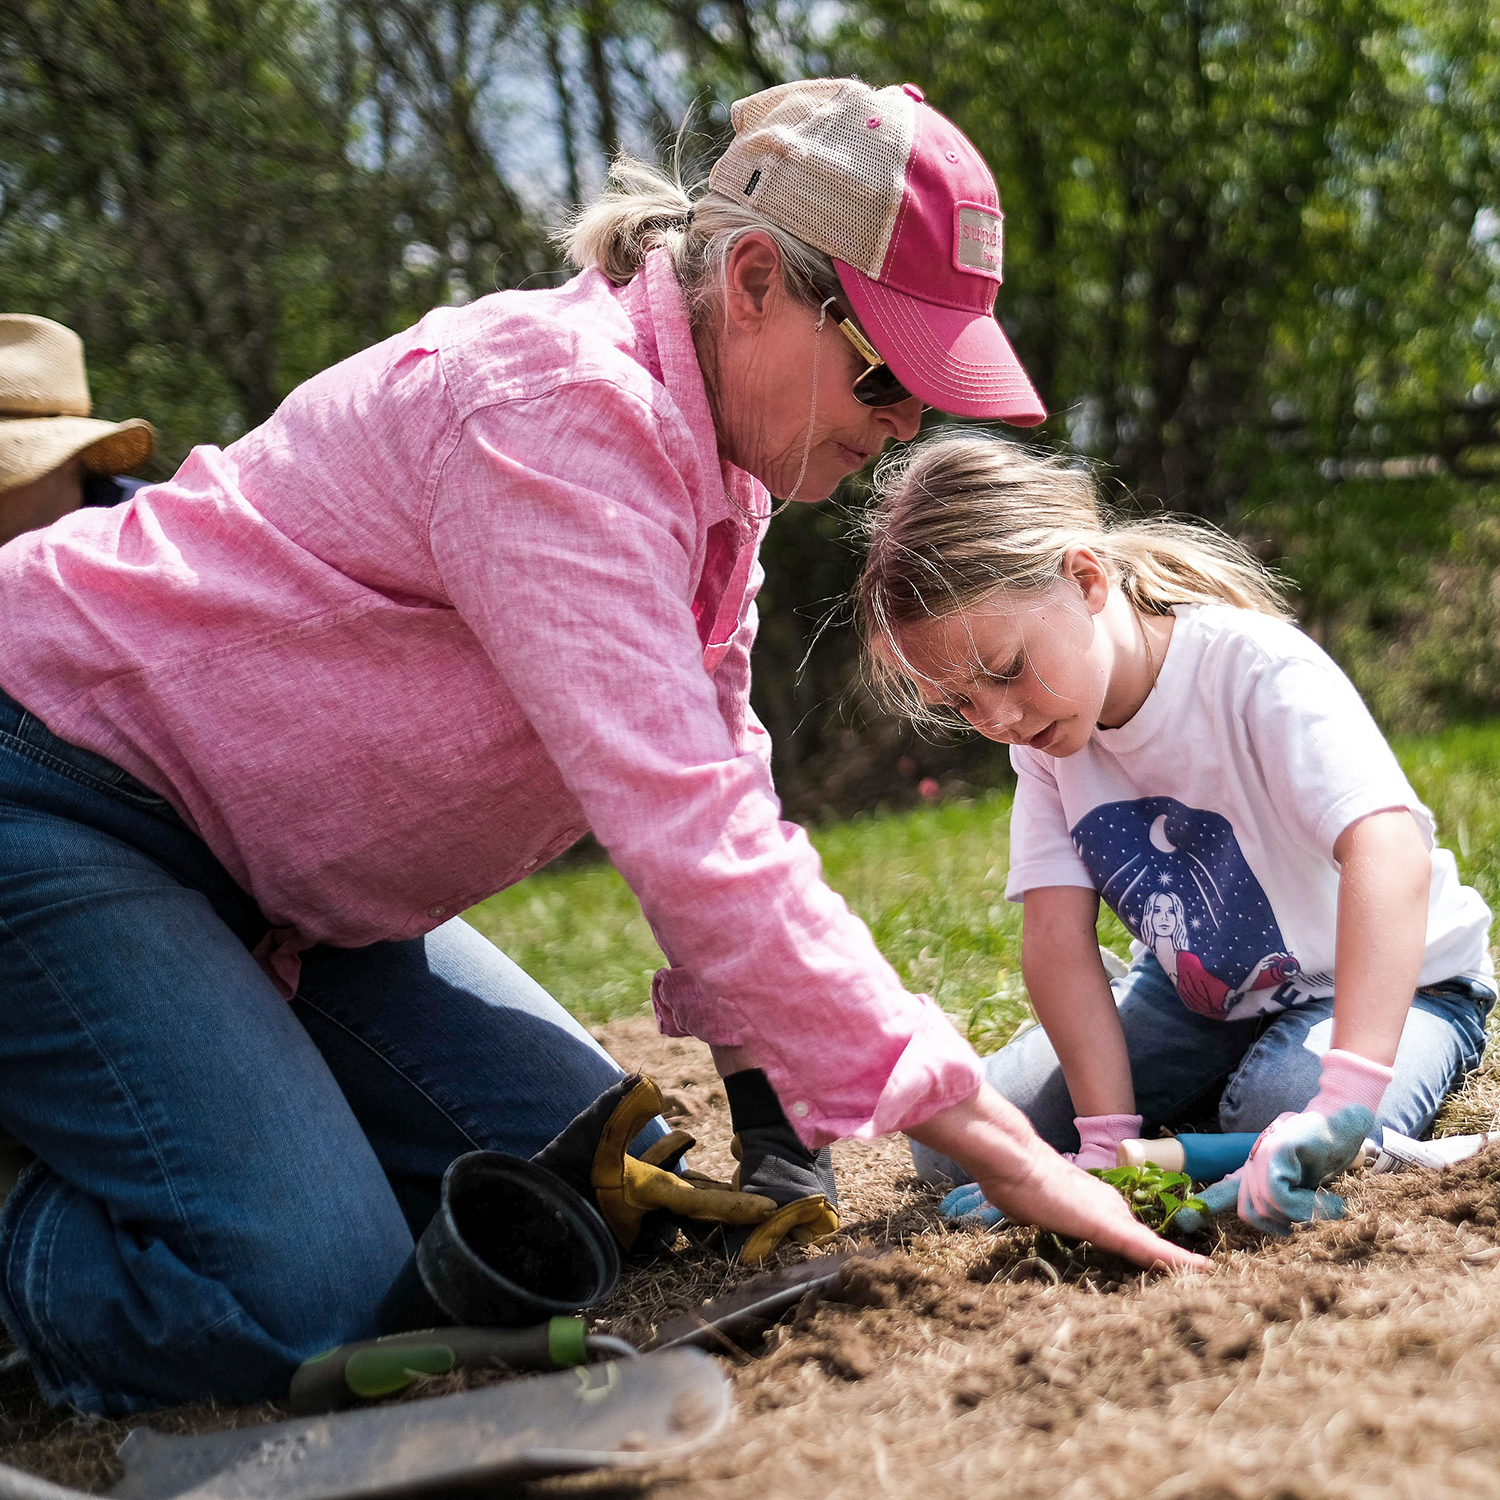 A woman and child planting something in the ground